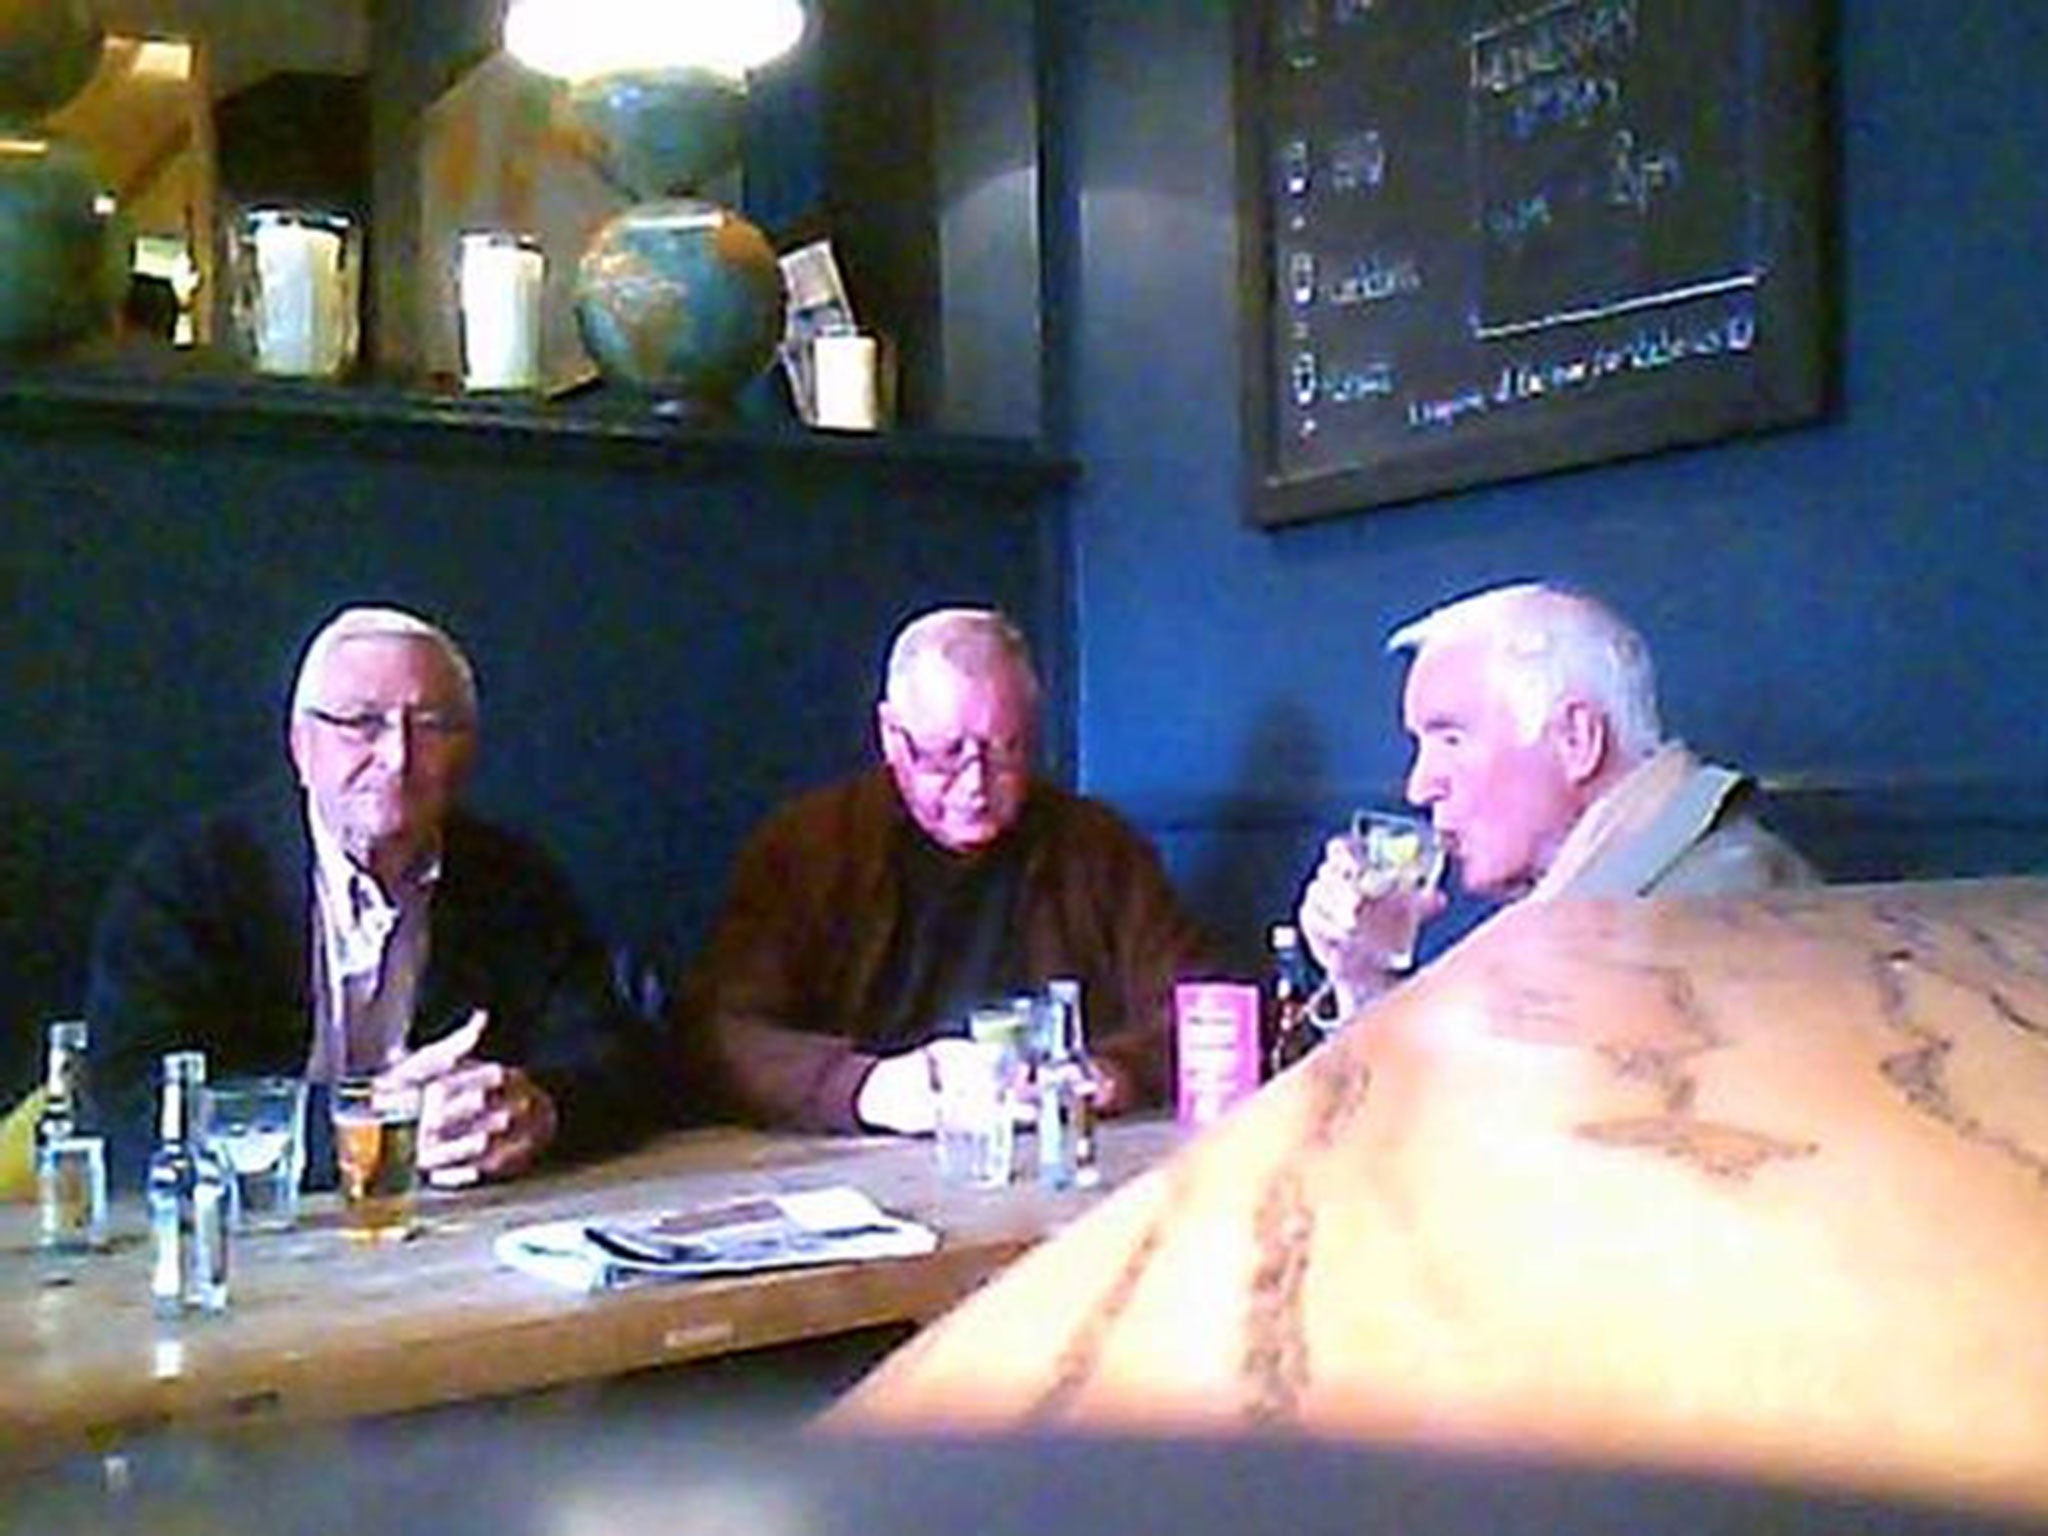 John Collins, Terry Perkins and Brian Reader in a London pub from video surveillance